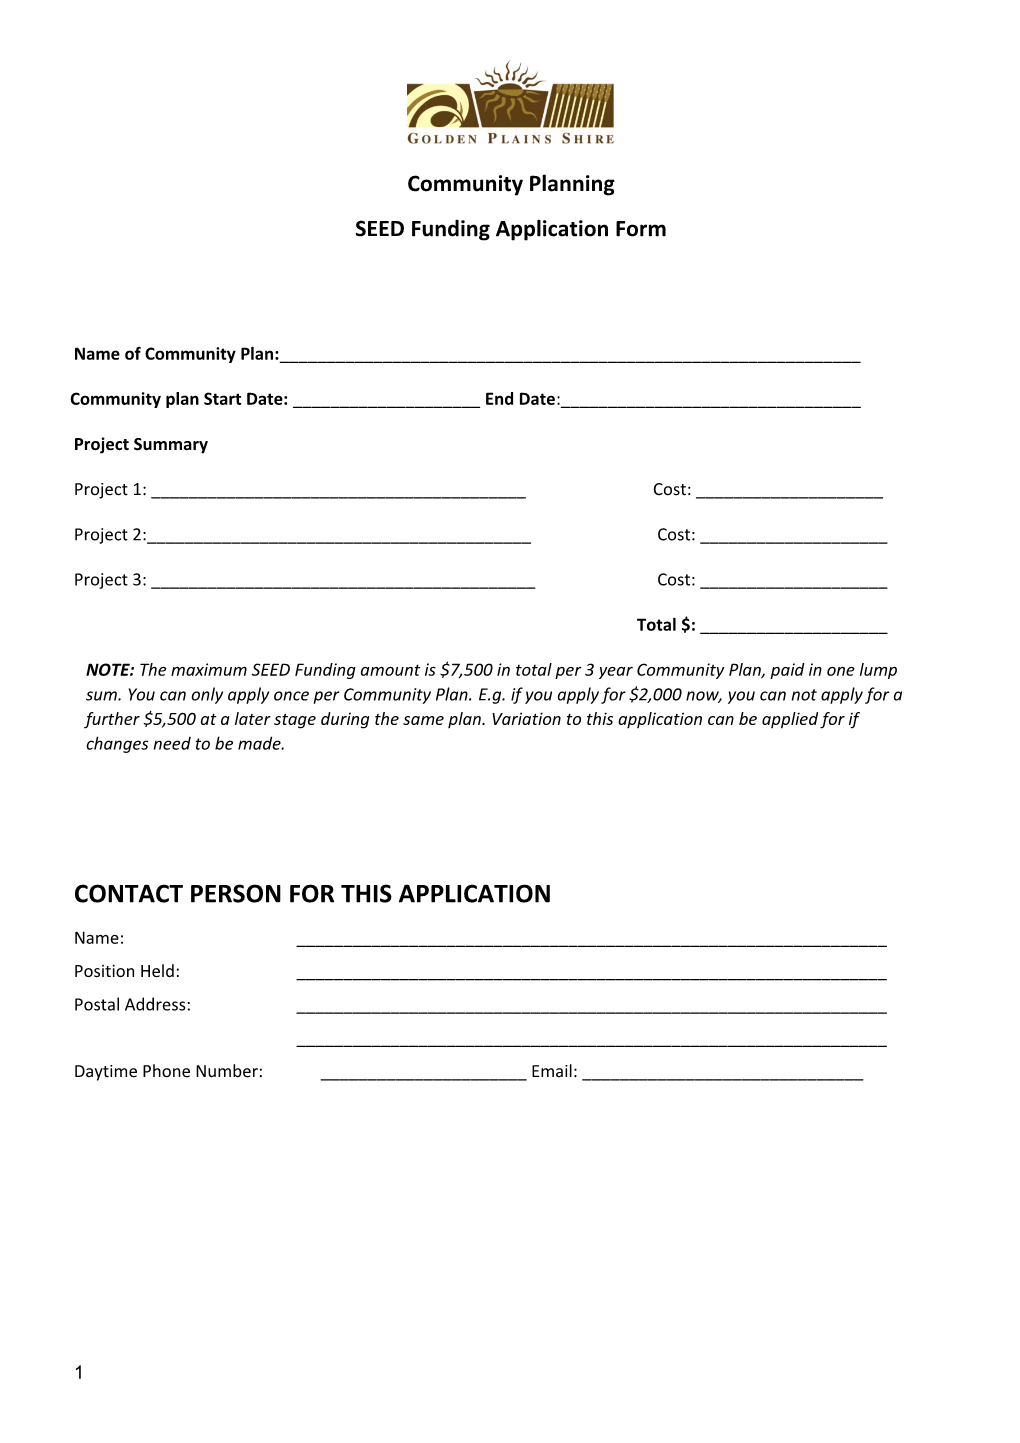 SEED Funding Application Form